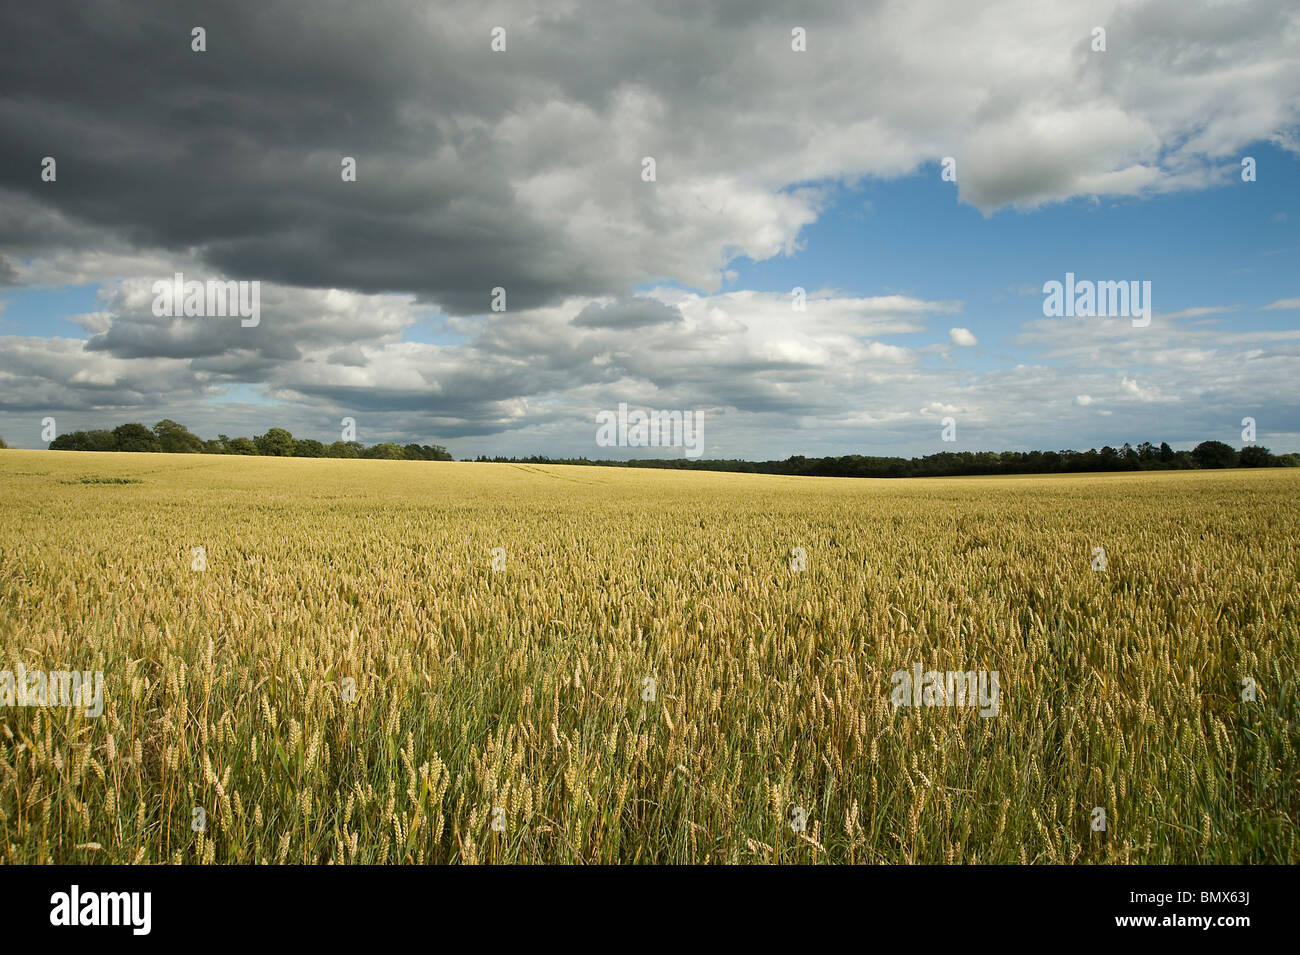 Ripe wheat field in Berkshire with stormy sky Stock Photo